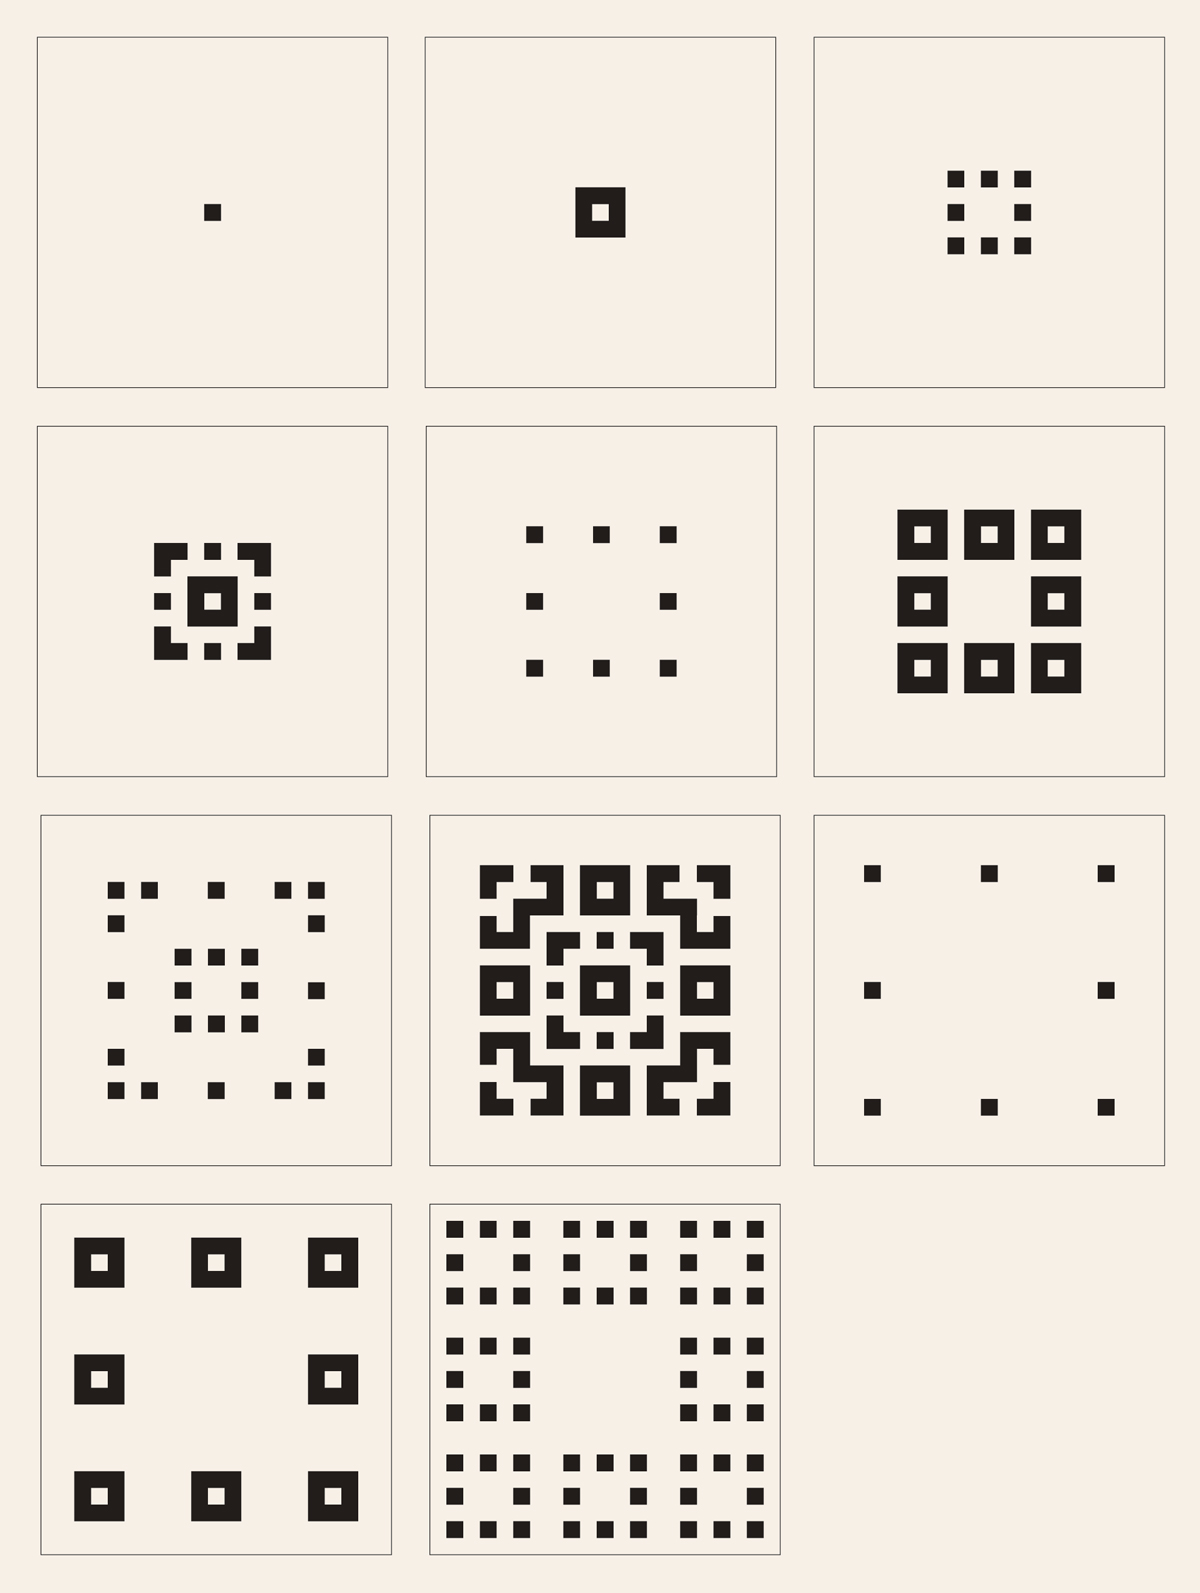 A diagram depicting the first eleven iterations of the sequence generated by a so-called cellular automaton. Cellular automata are systems consisting of an array of squares, each of which may be either on, which is rendered in the diagram as black, or off, which is rendered as white. The sequence depicted here operates according to one rule, which is as follows: in each new iteration, a cell will be on if, and only if, in the previous iteration an odd number of its eight surrounding squares were on.